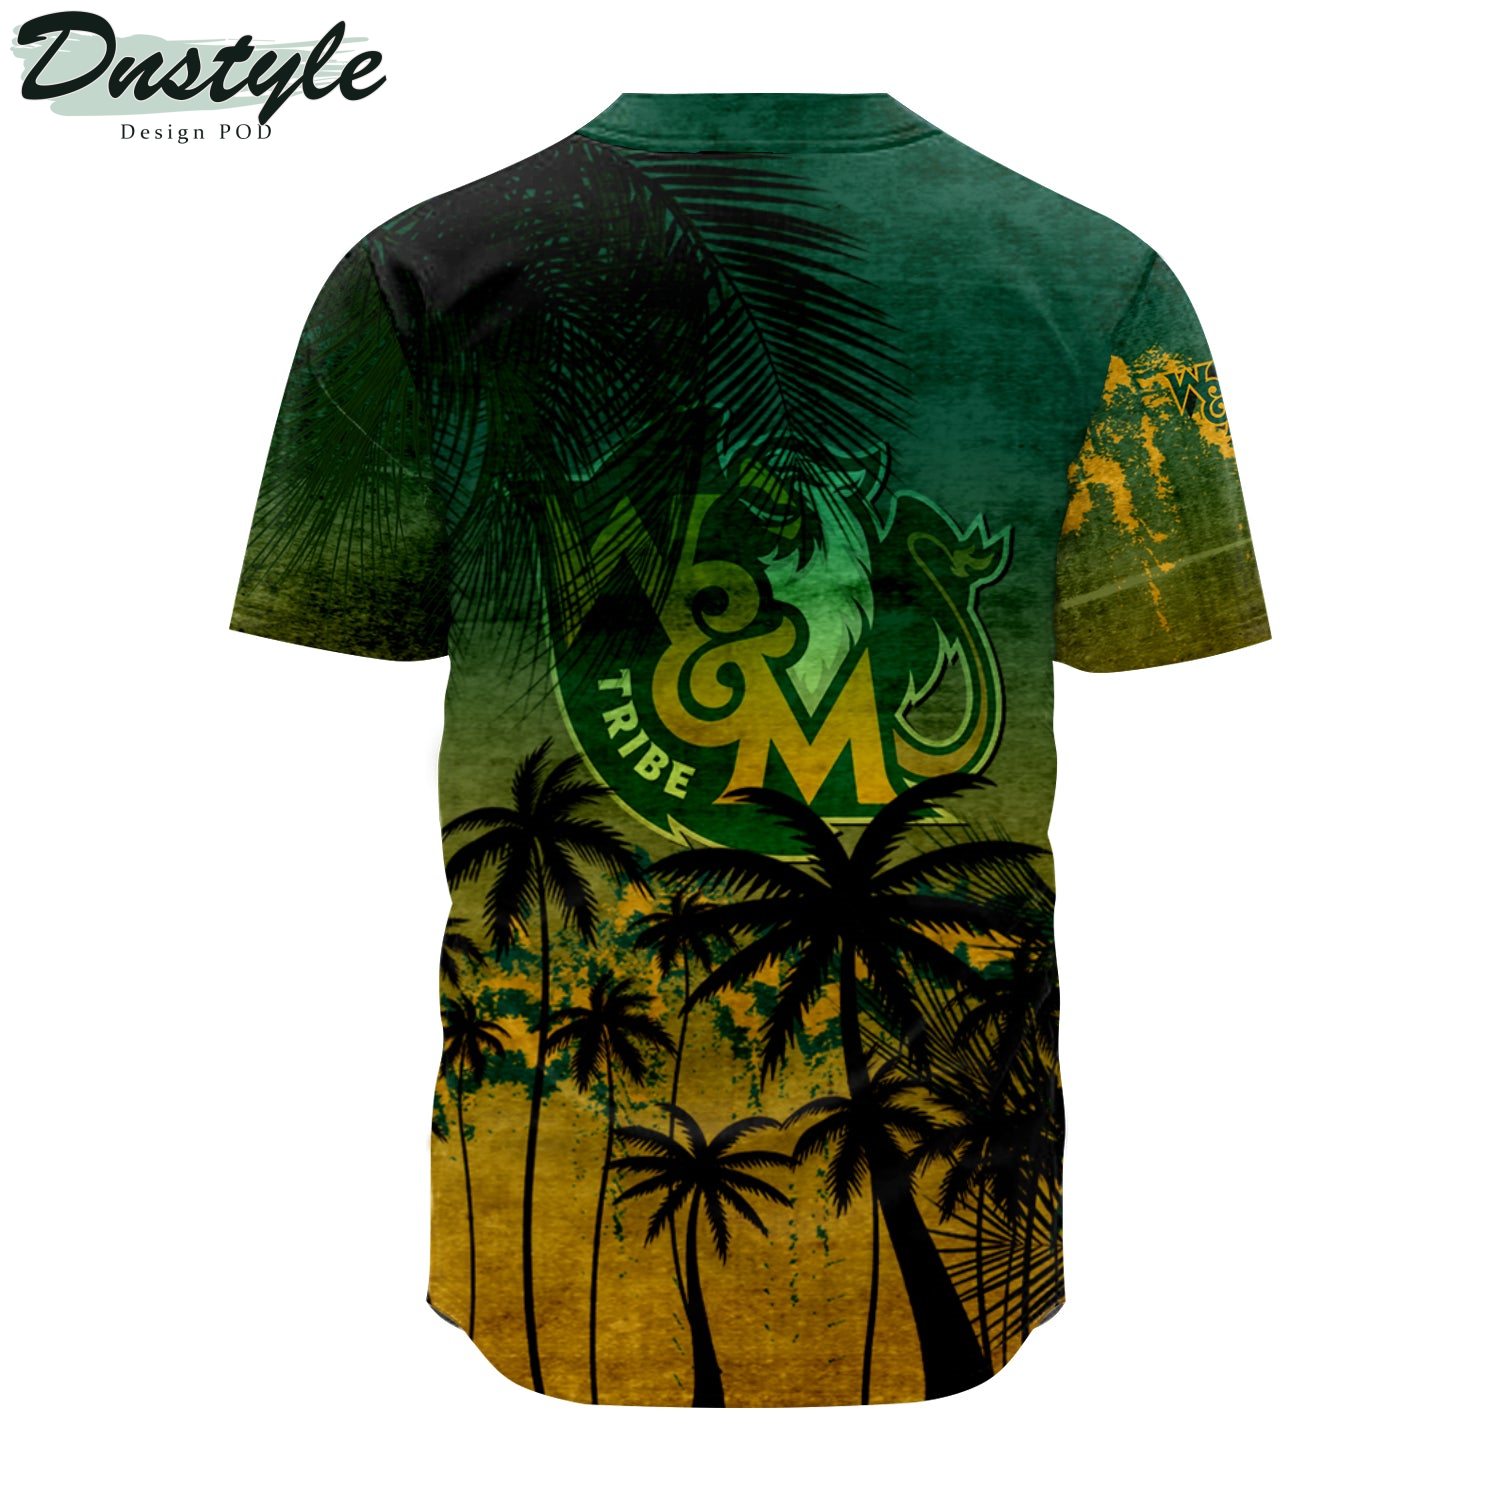 William and Mary Tribe Baseball Jersey Coconut Tree Tropical Grunge